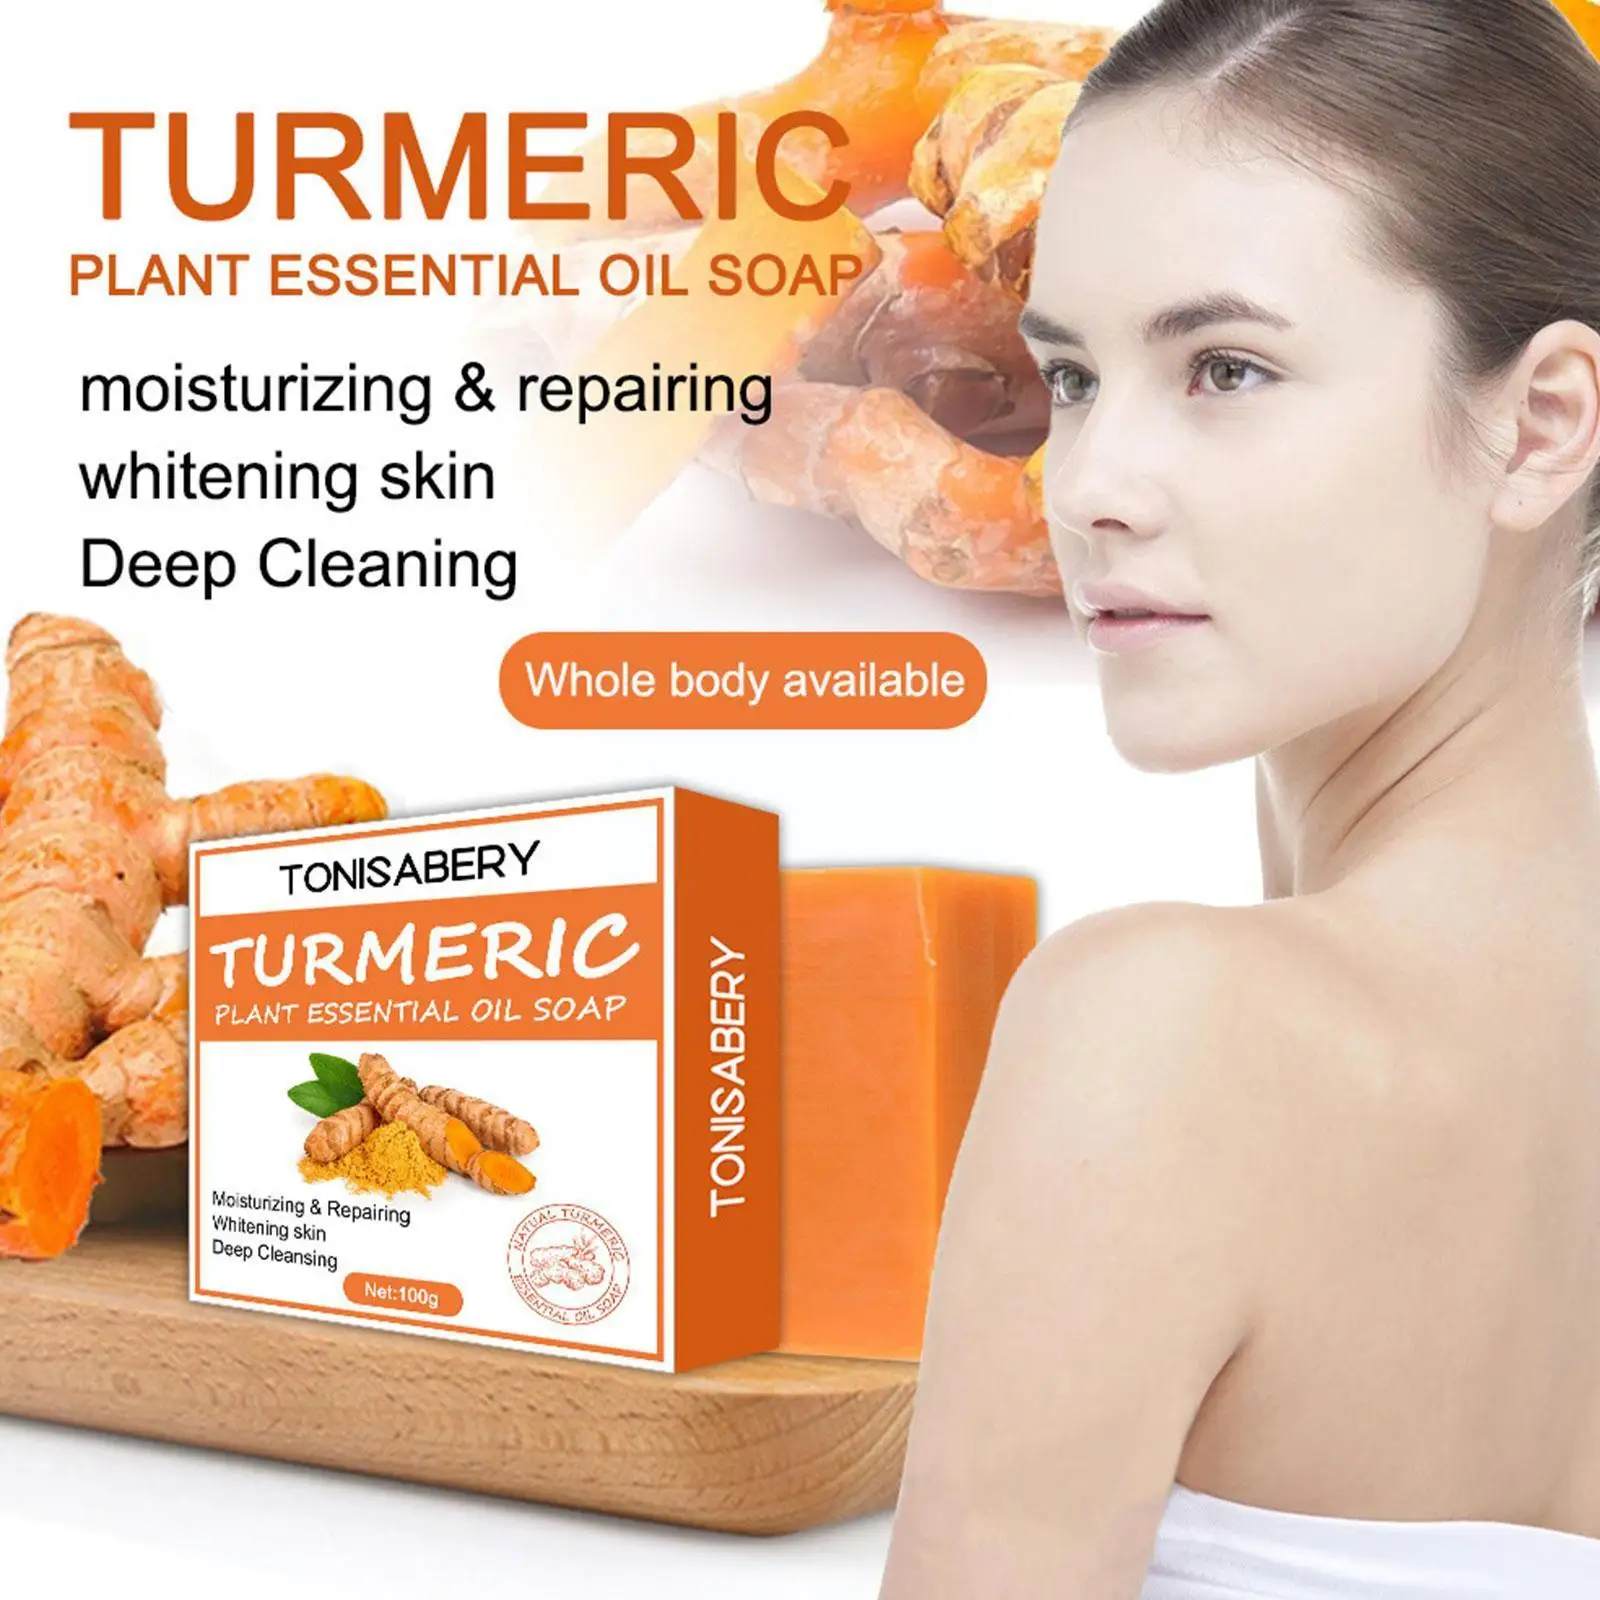 

Turmeric Cream Whitening Soap Natural Radiant Skin Scars And Reduction Soap Facial Dark Wrinkles Acne Spots Smoothing Handm E0P2